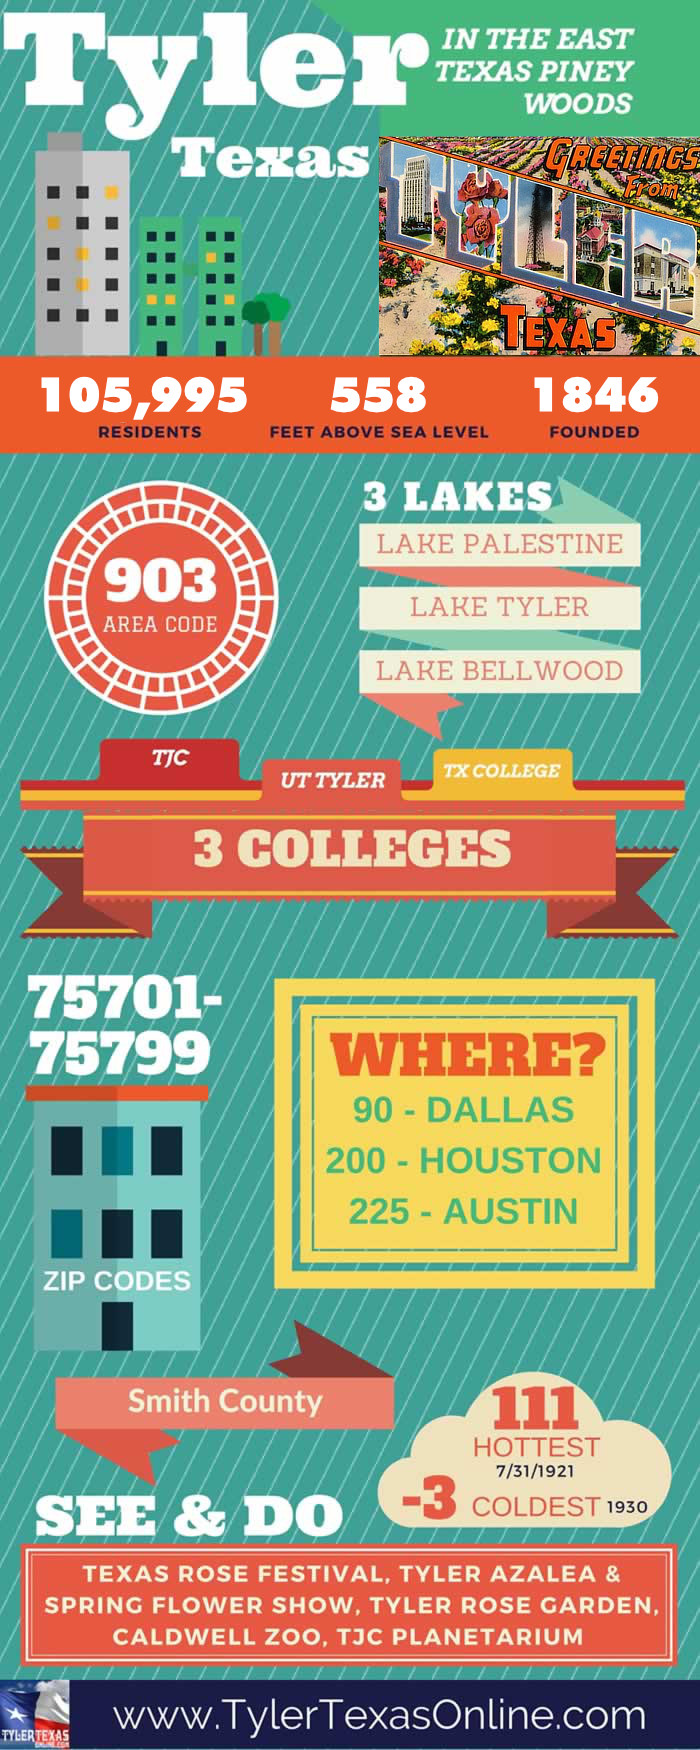 Tyler Texas infographic ... Pin to Facebook, Pinterest, Instagram and other social media!